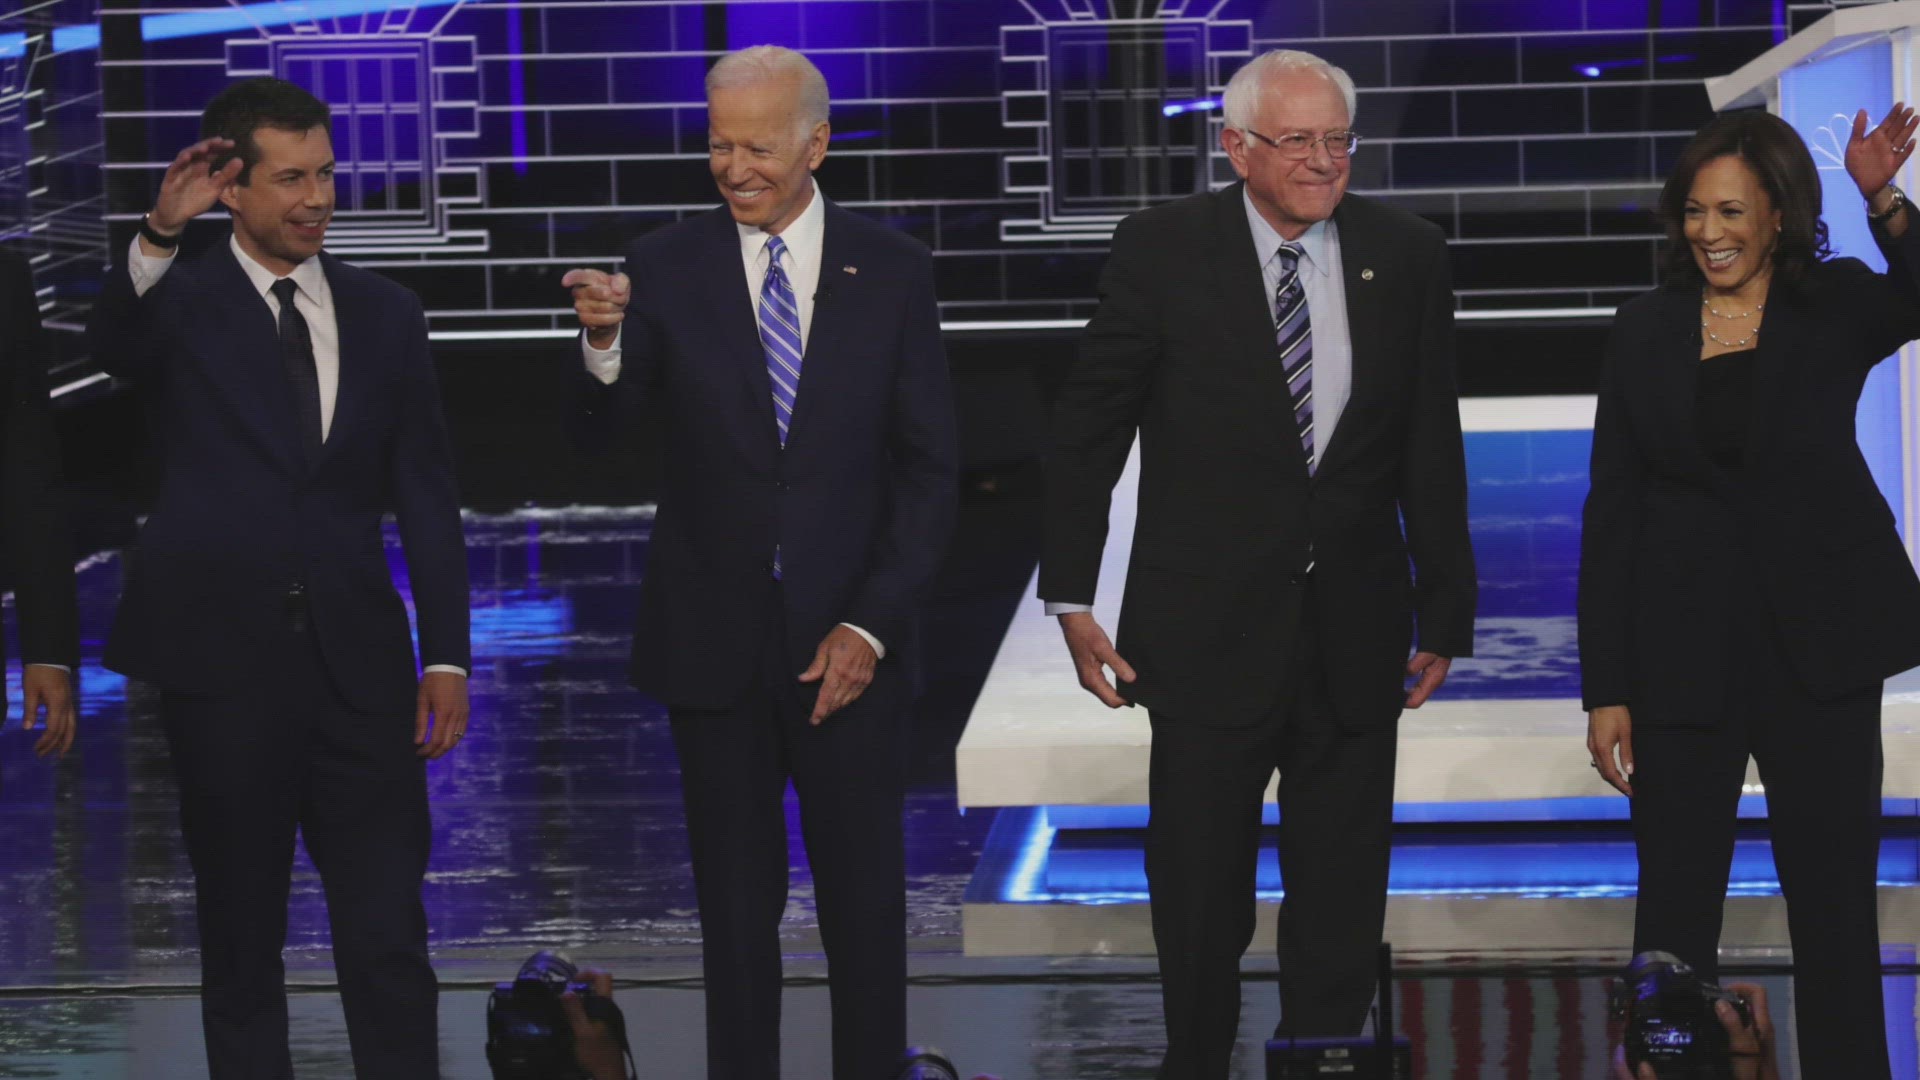 Bernie Sanders edges past Joe Biden in a new national poll ahead of the first big challenges of the 2020 primary. Veuer's Justin Kircher has the breakdown.